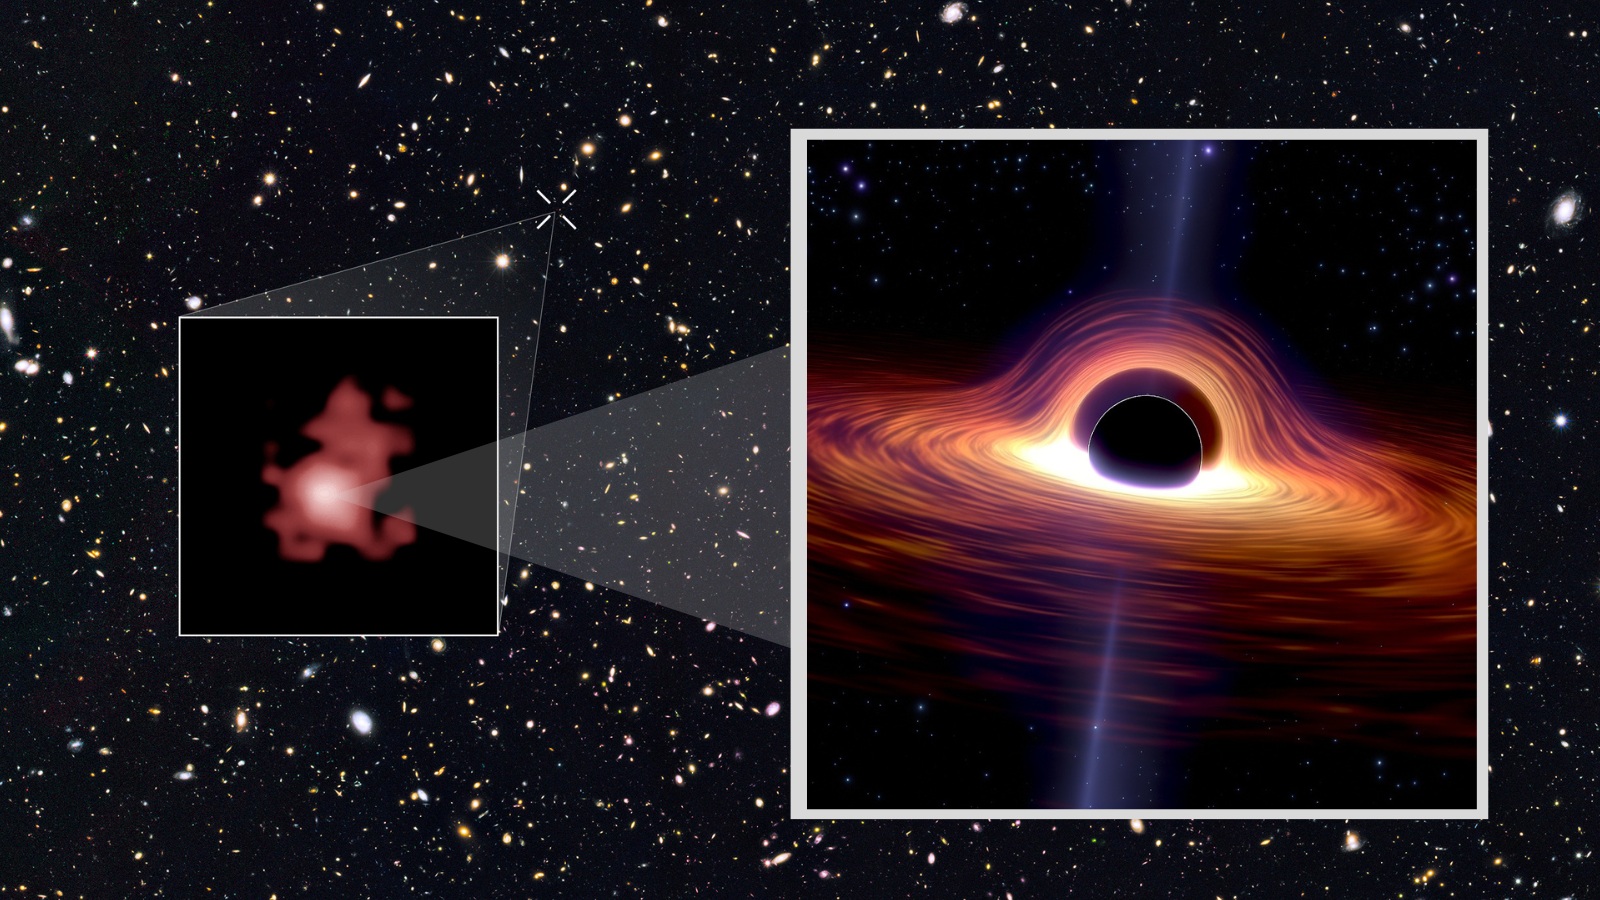 James Webb Space Telescope discovers oldest and most distant black hole ever seen | Space